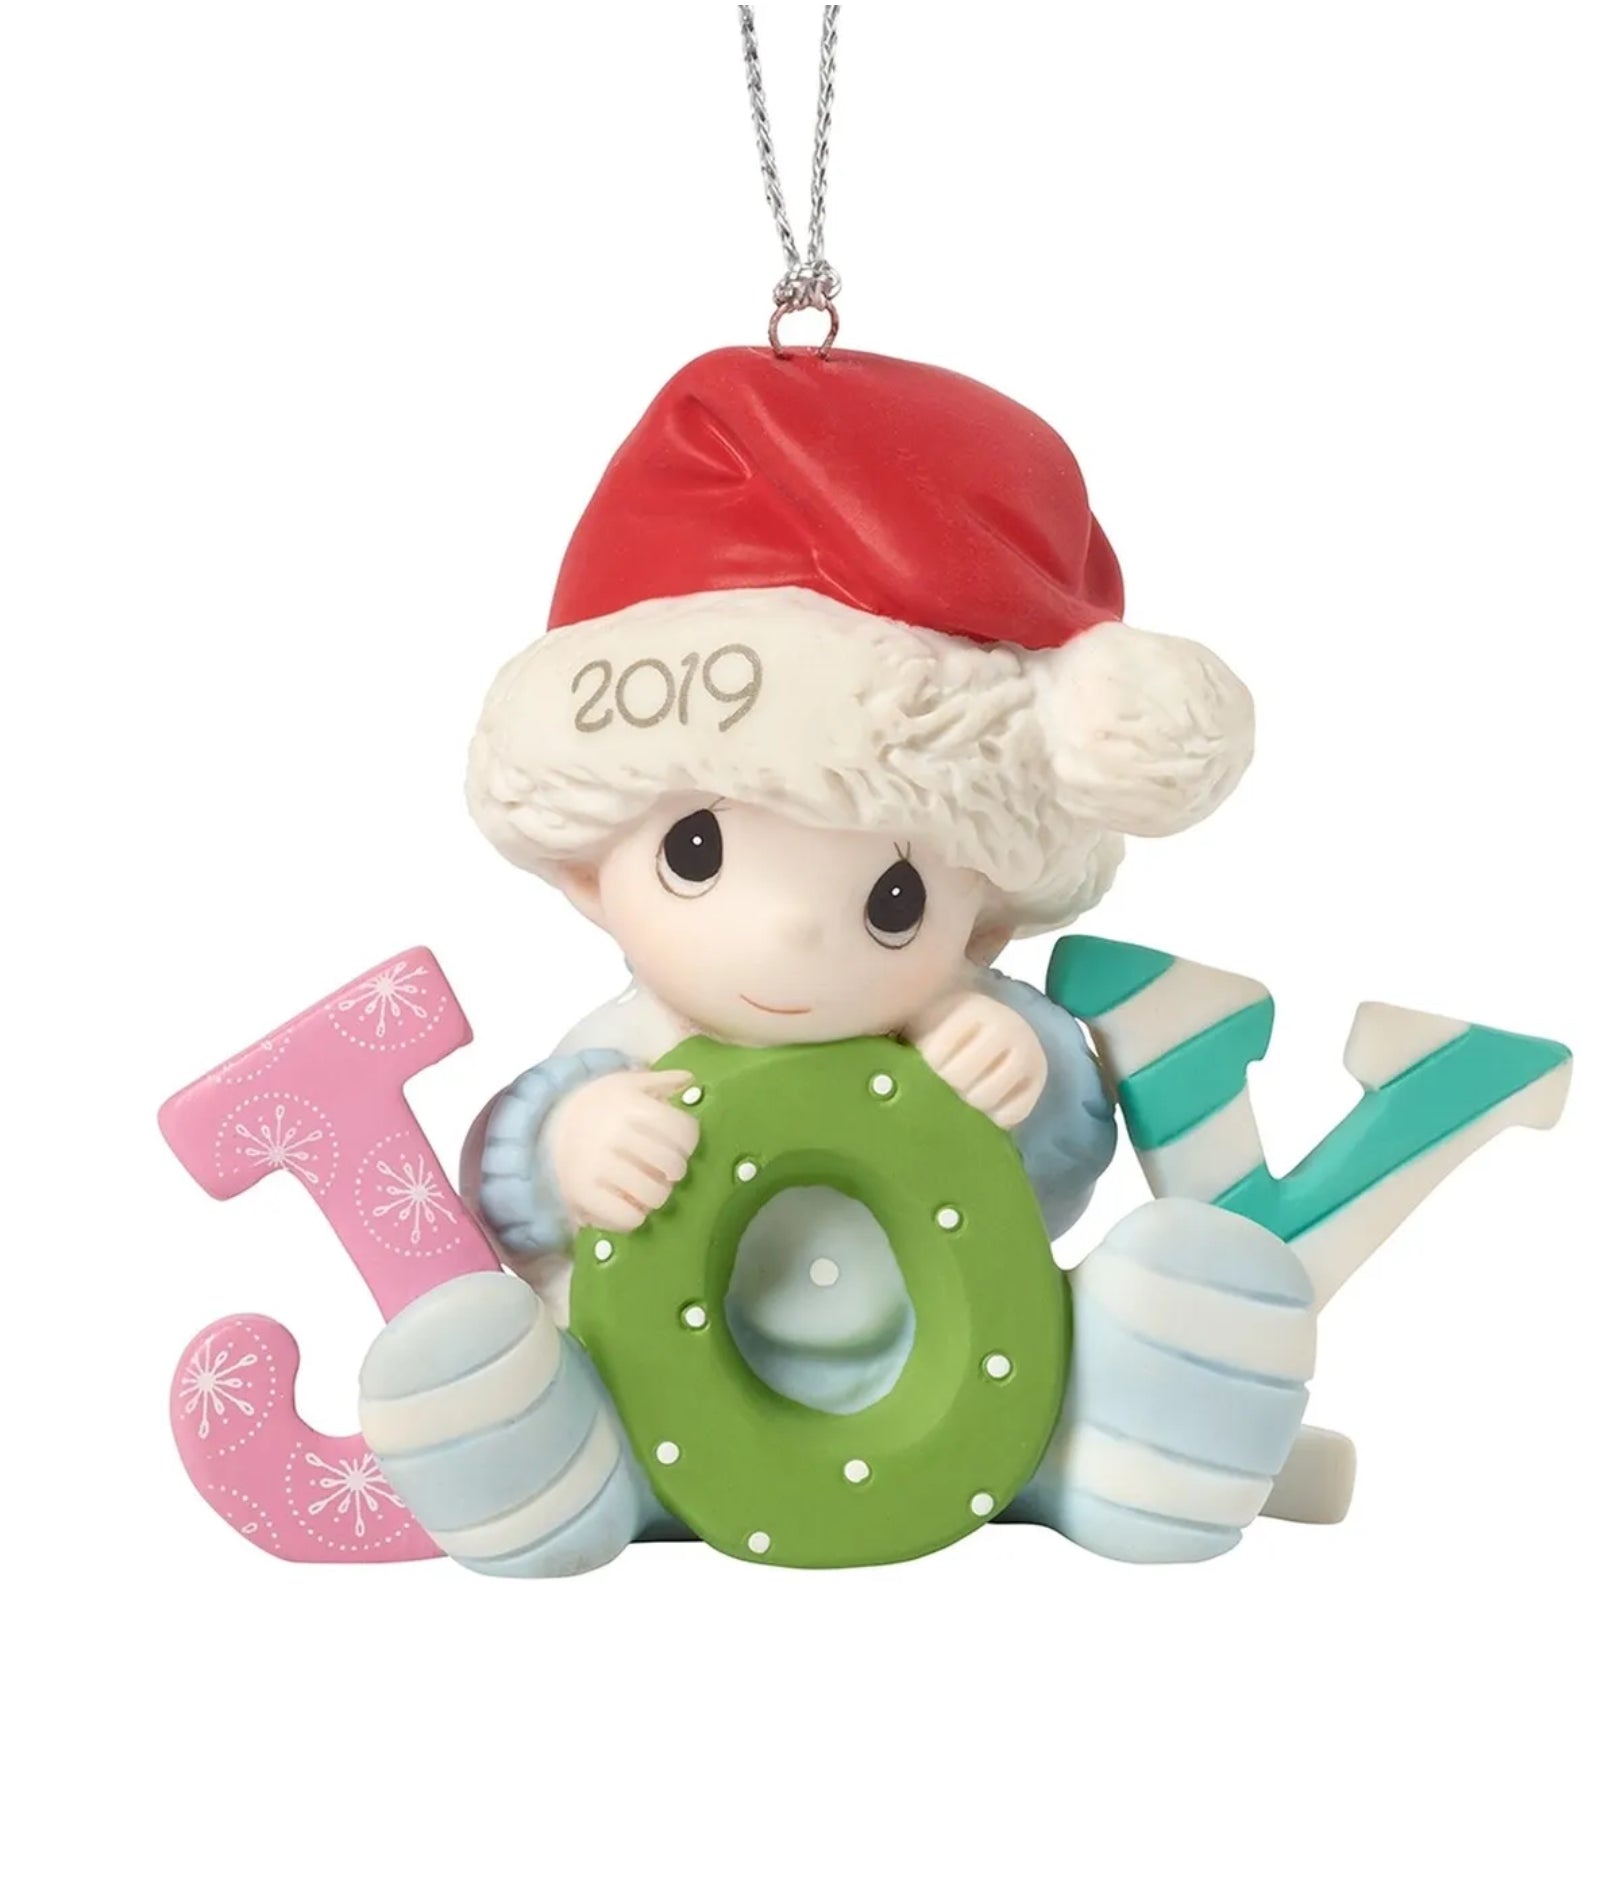 Baby's First Christmas 2019 (Boy) -  Precious Moment Ornament